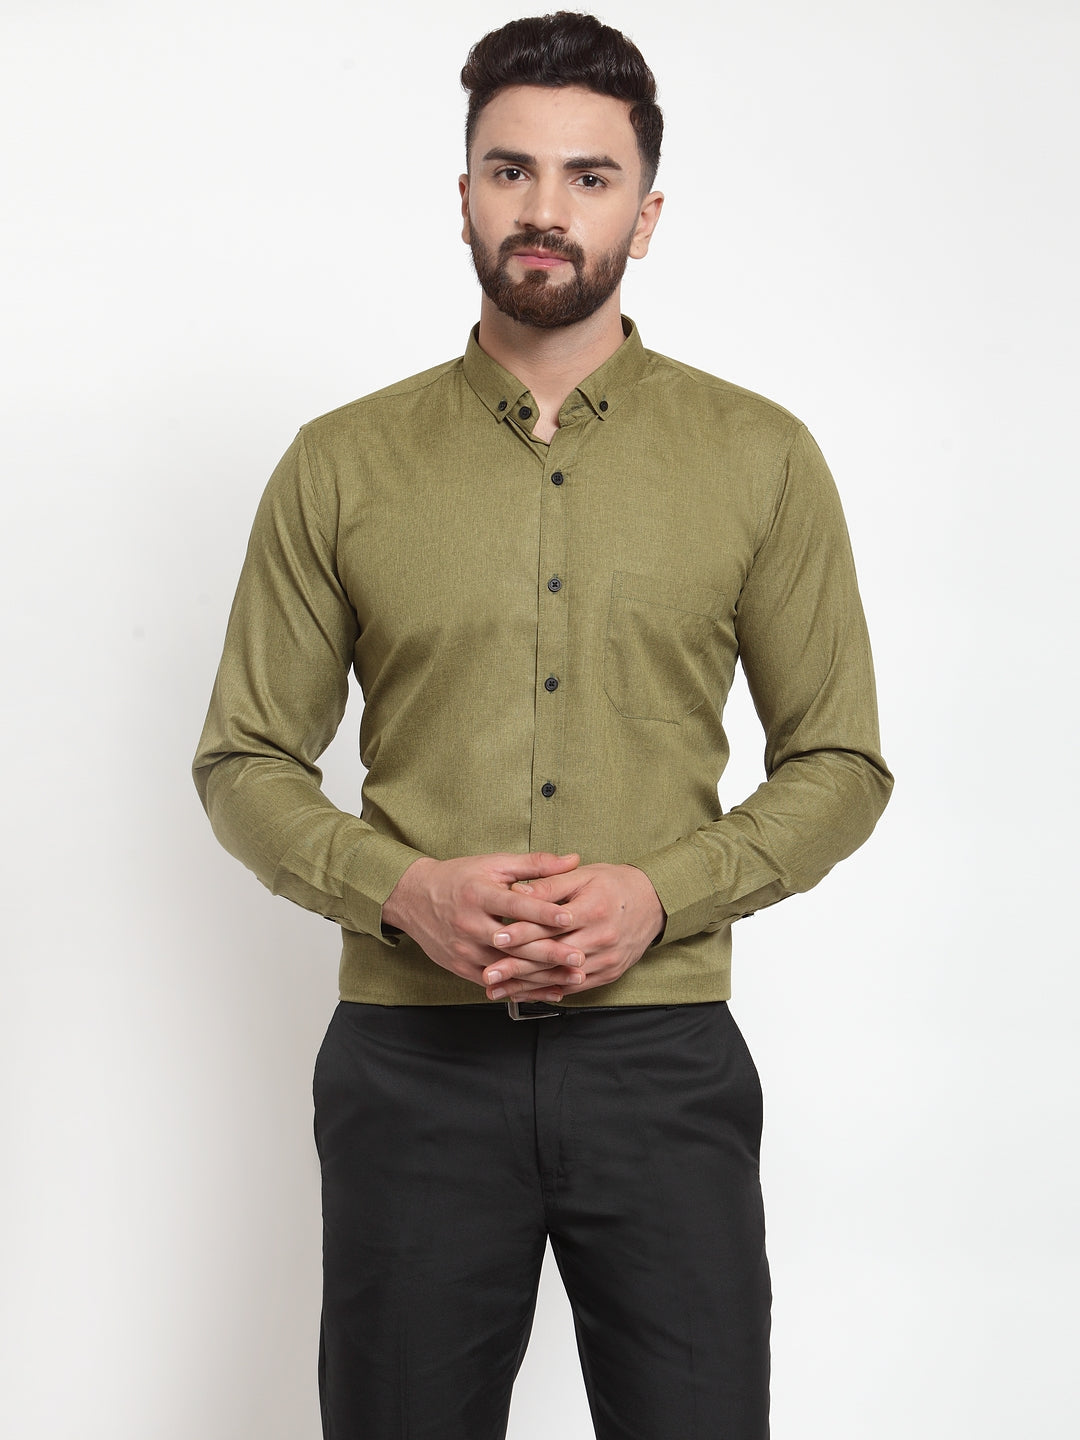 Men's Olive Cotton Solid Button Down Formal Shirts ( SF 734Olive ) - Jainish